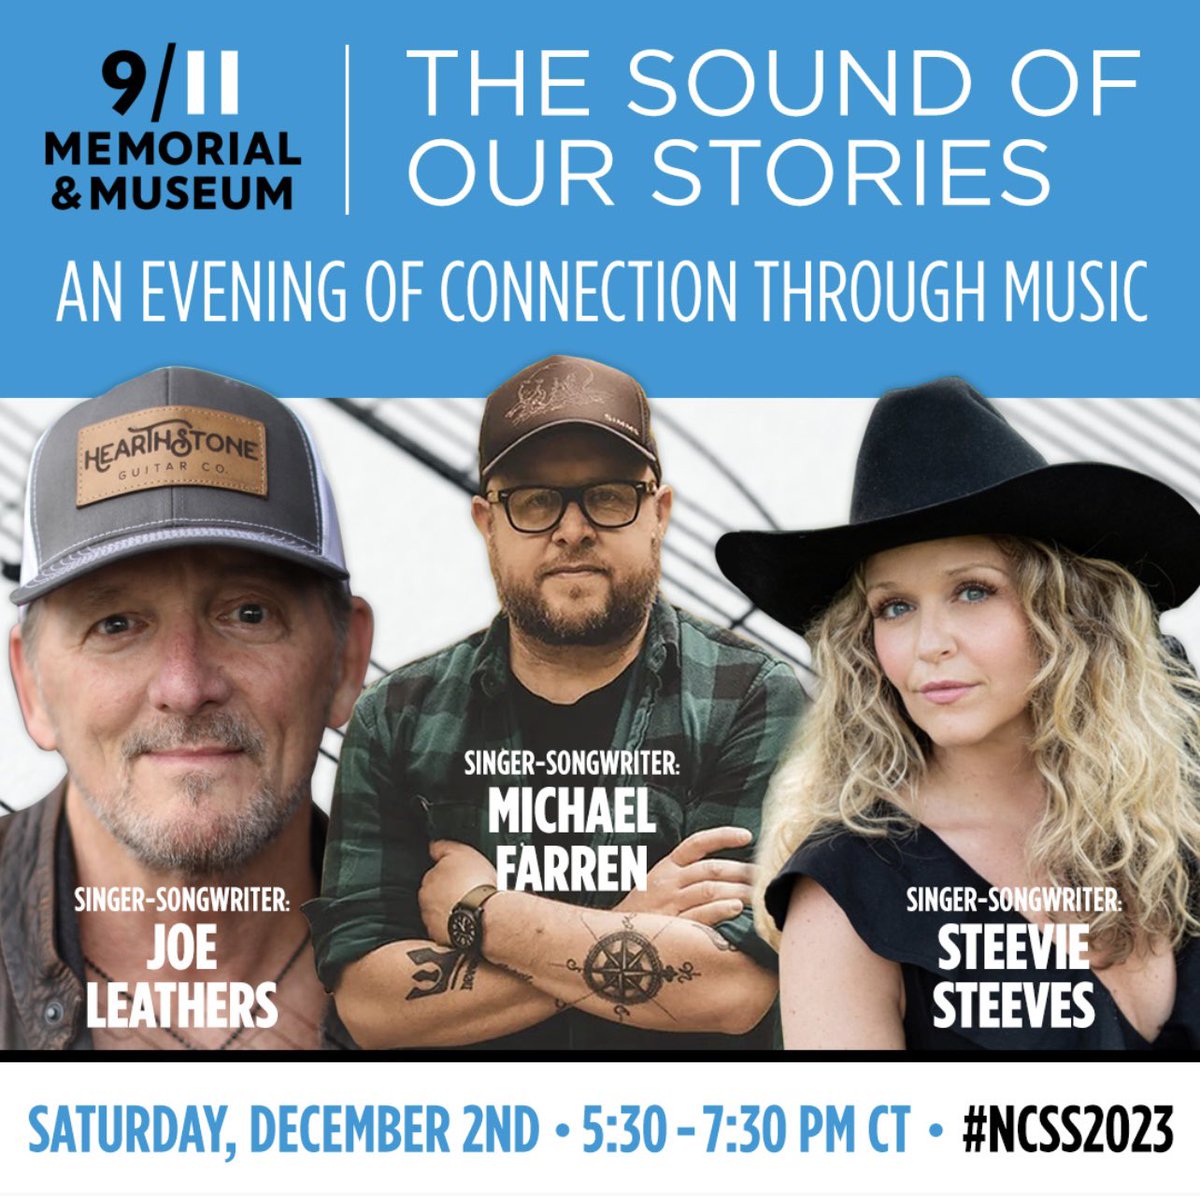 Enjoy music, food, and networking. Join us for a night of connection through music! Don't miss the Grammy-winning Nashville songwriters at the @911Memorial and Museum's 'Sound of Our Stories: An Evening of Connection through Music' #NCSS2023 Saturday, December 2 at 5:30 PM.